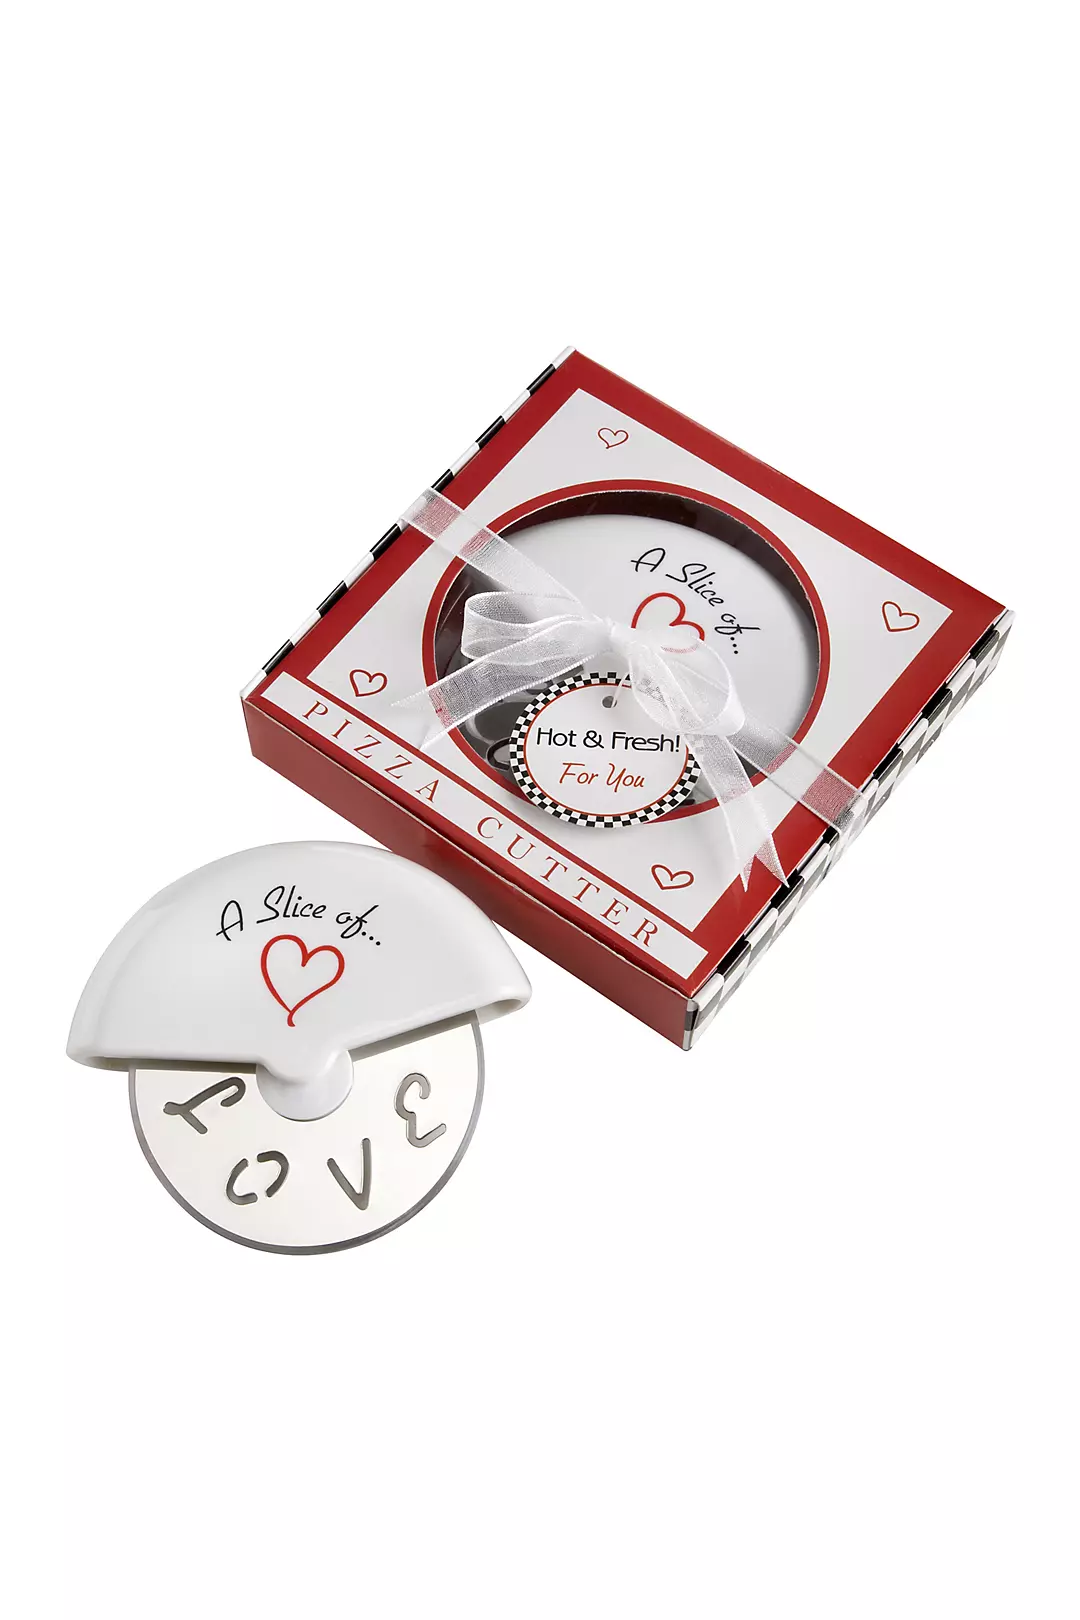 A Slice of Love Stainless Steel Pizza Cutter Favor Image